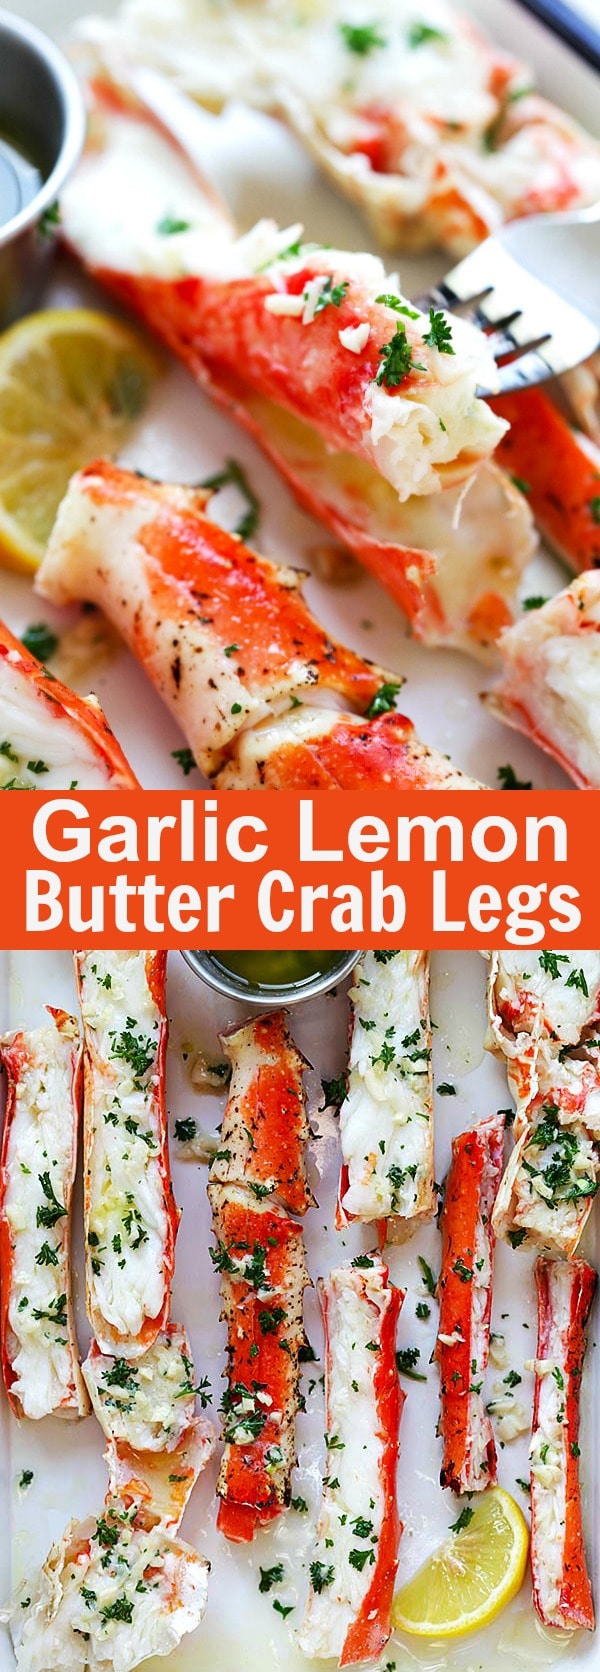 Garlic Lemon Butter Crab Legs – crazy delicious king crab legs in garlic herb and lemon butter. This crab legs recipe is so good you want it everyday | rasamalaysia.com